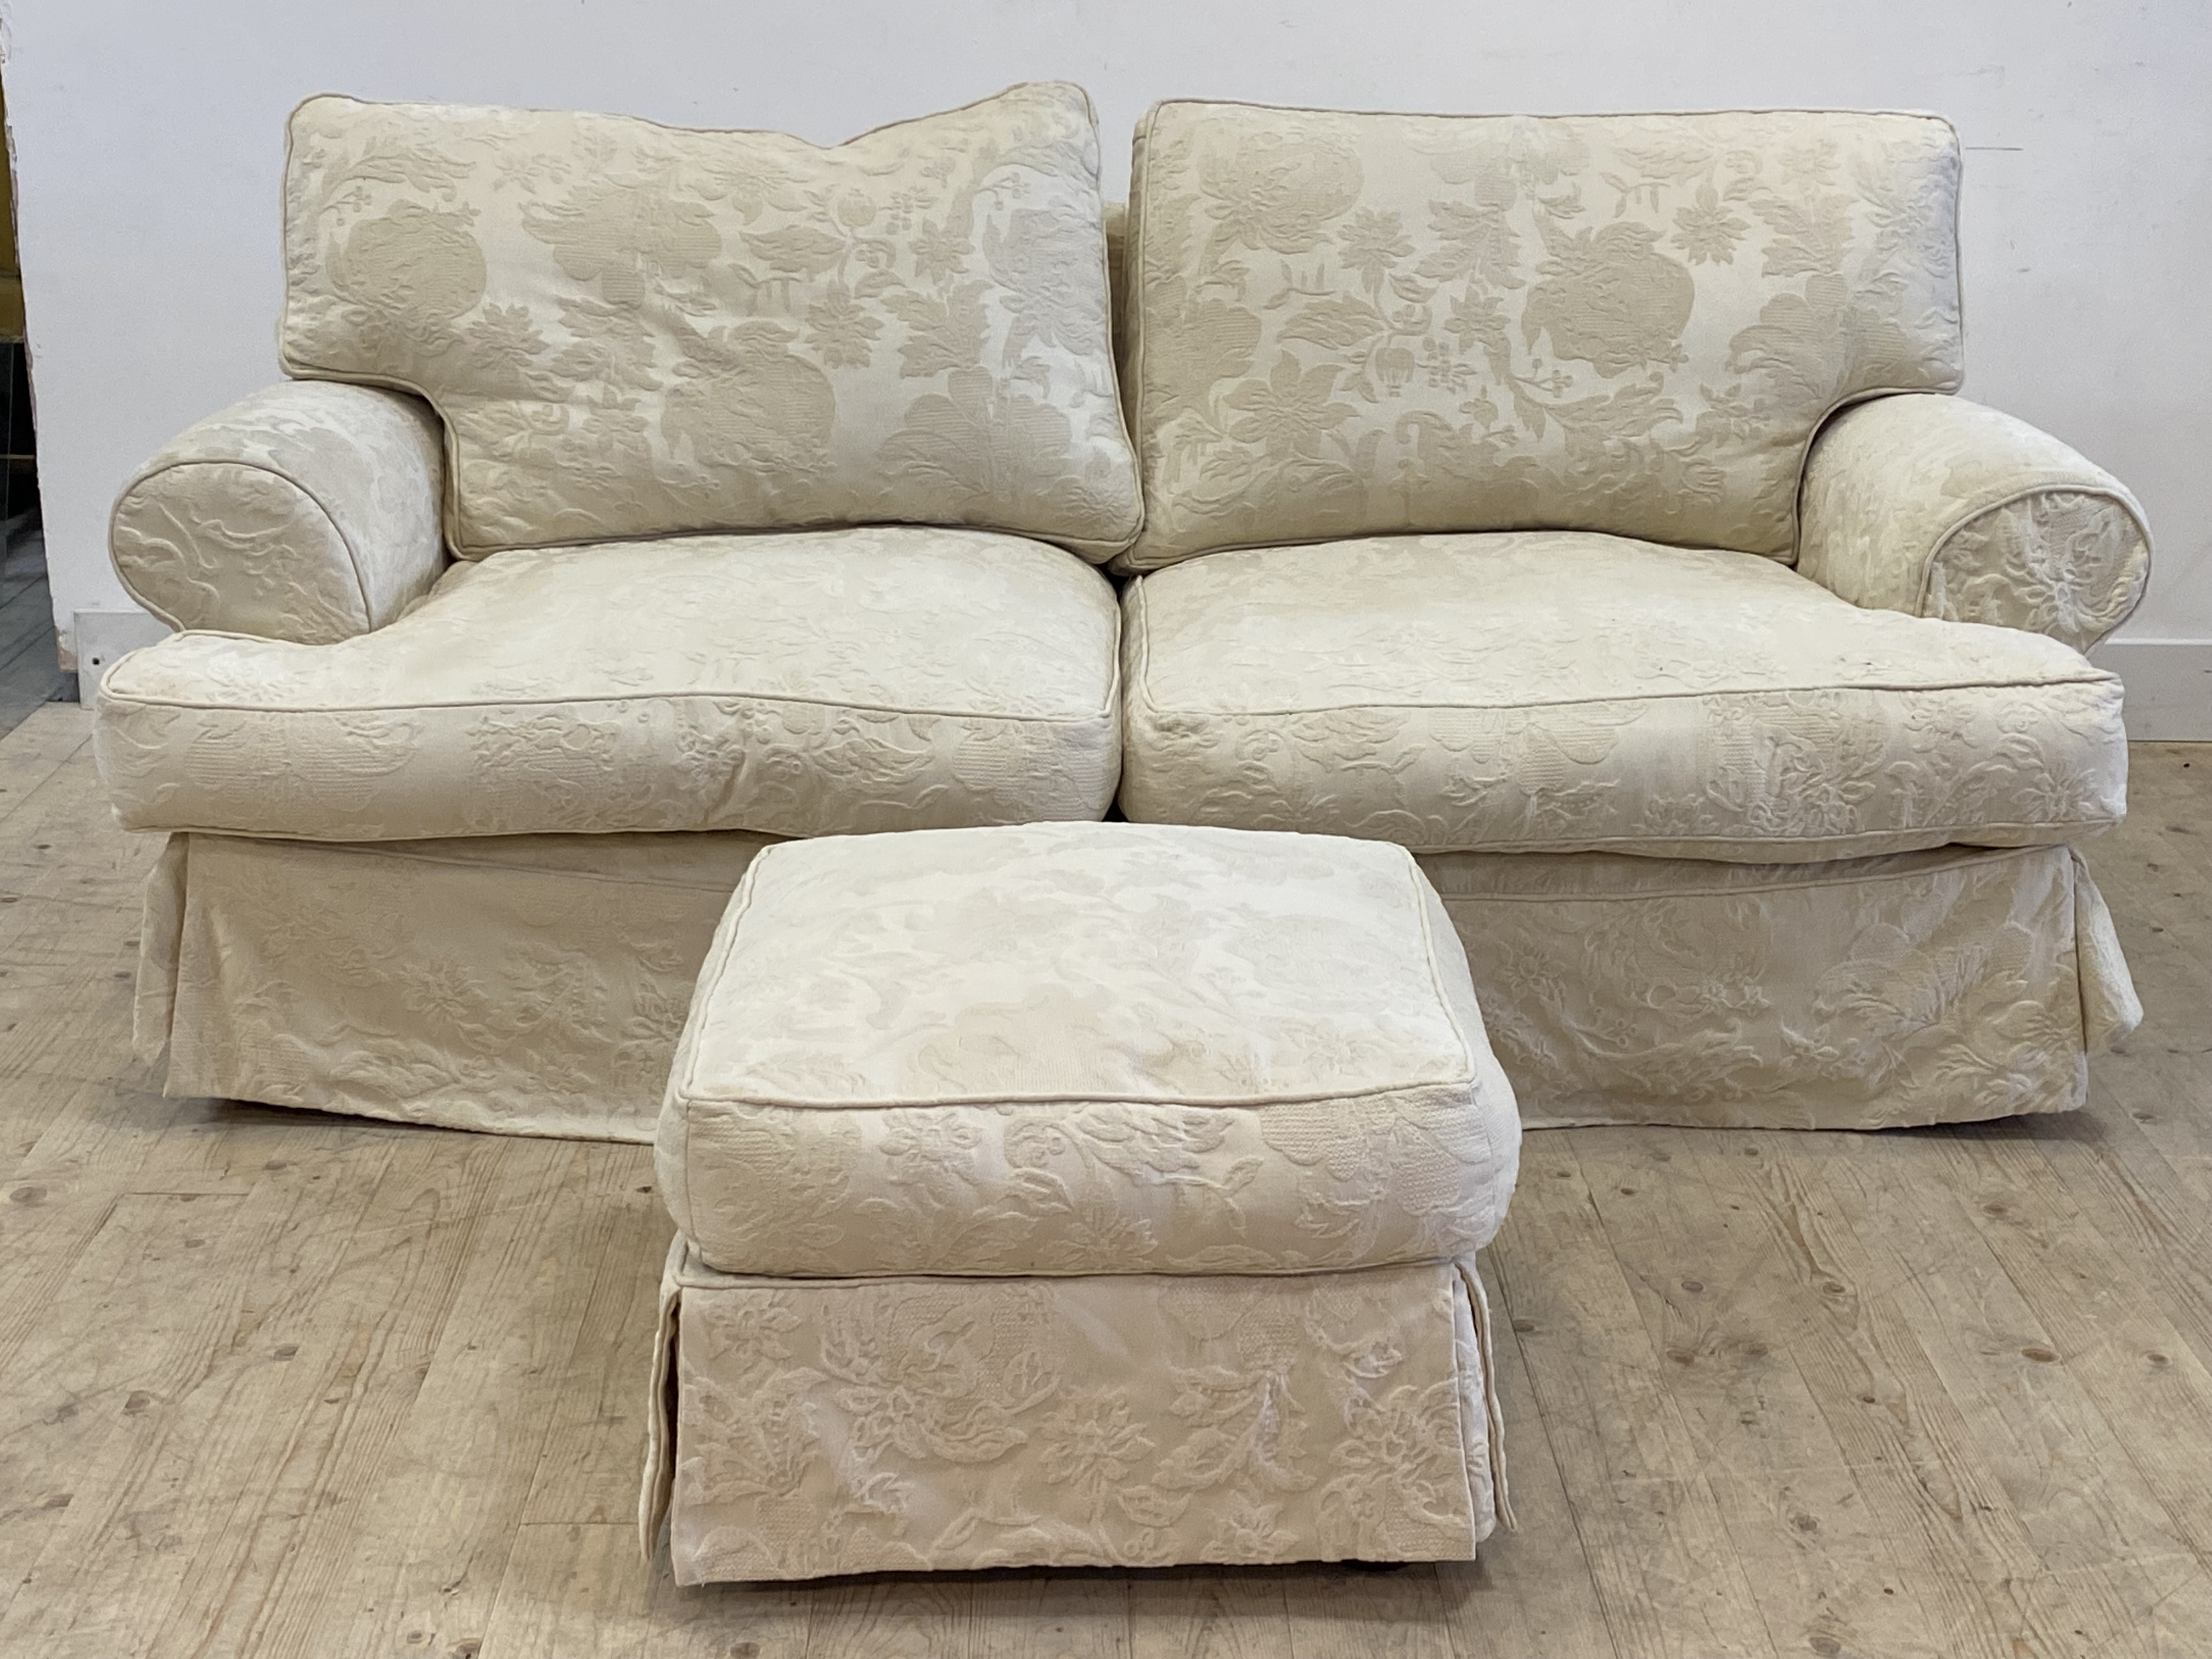 A traditional two seat sofa, upholstered in a fitted white damask cover, raised on turned bun